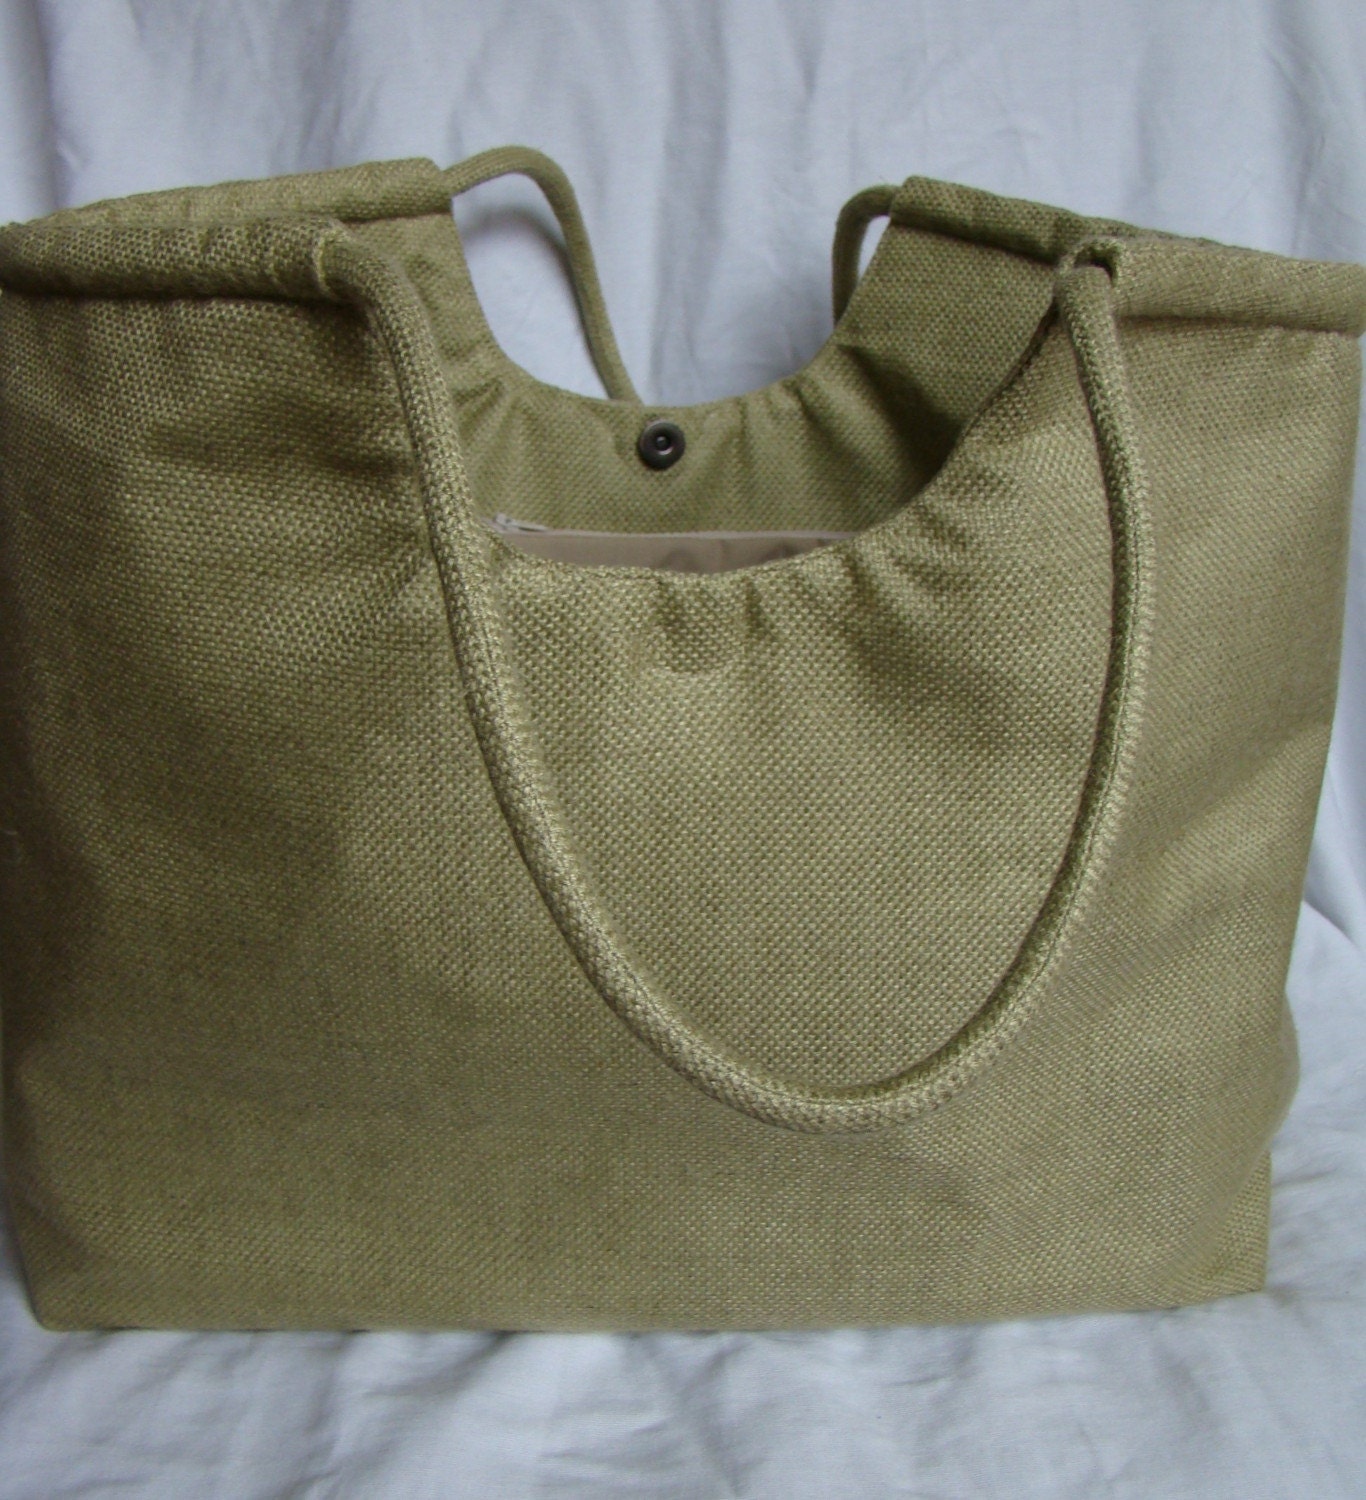 Sage Green Celeste Bag with matching Fob